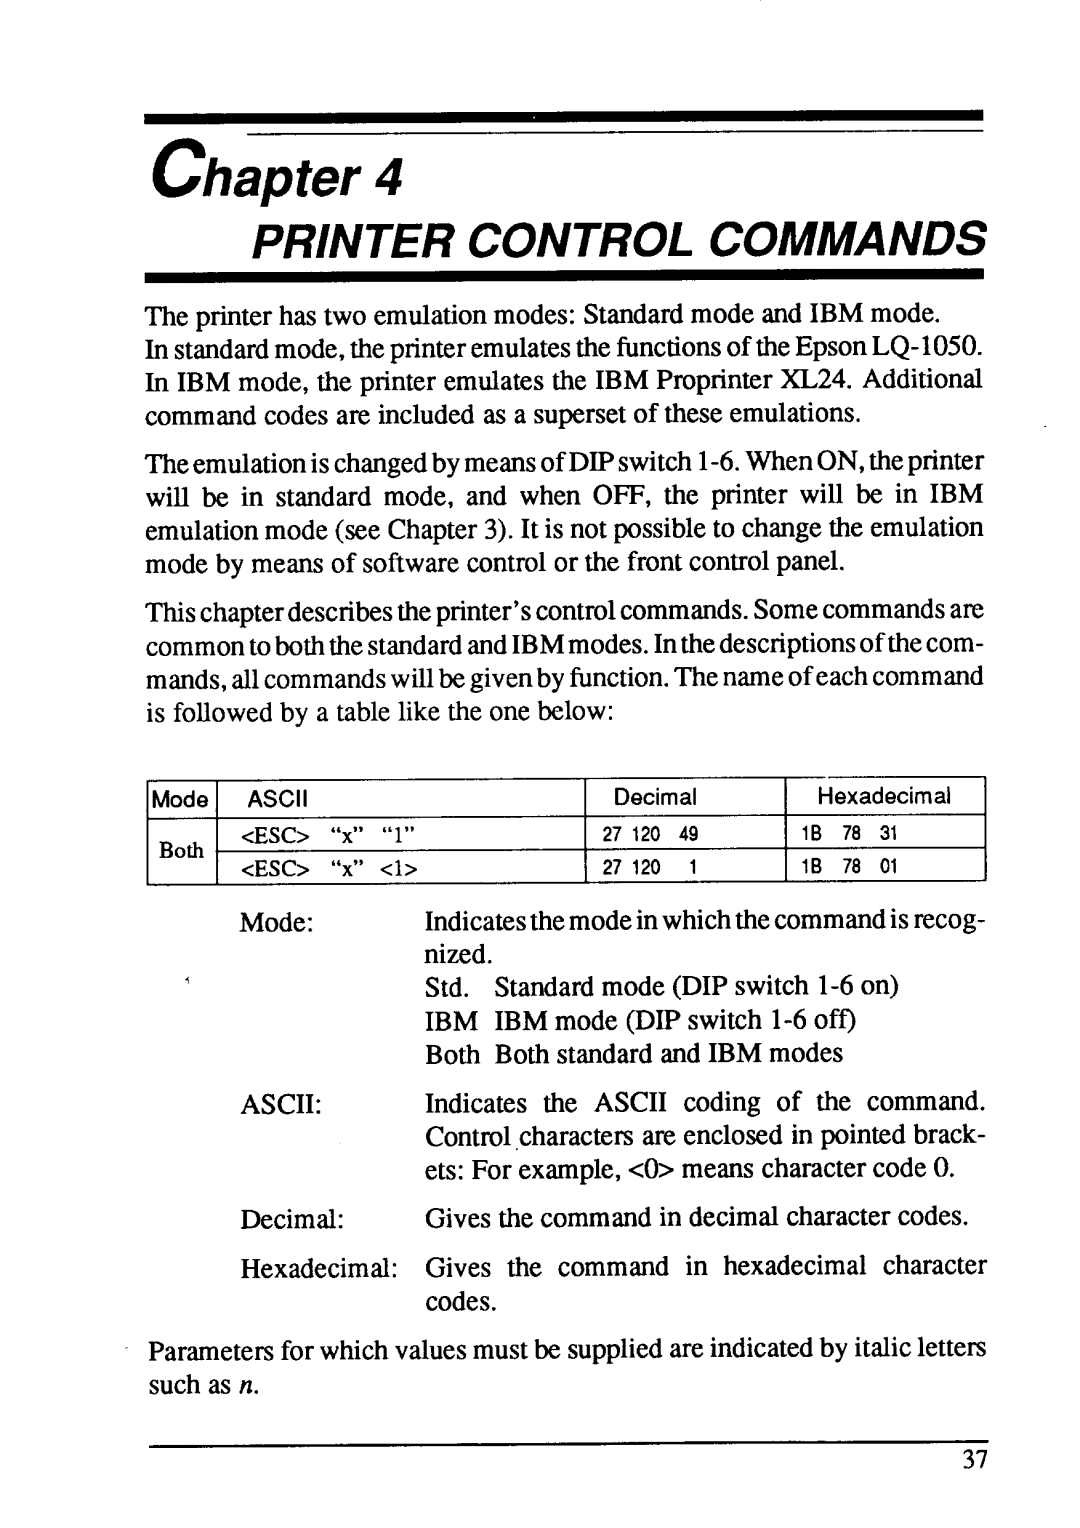 Star Micronics LC24-15 user manual chapter, Printer Control Commands 